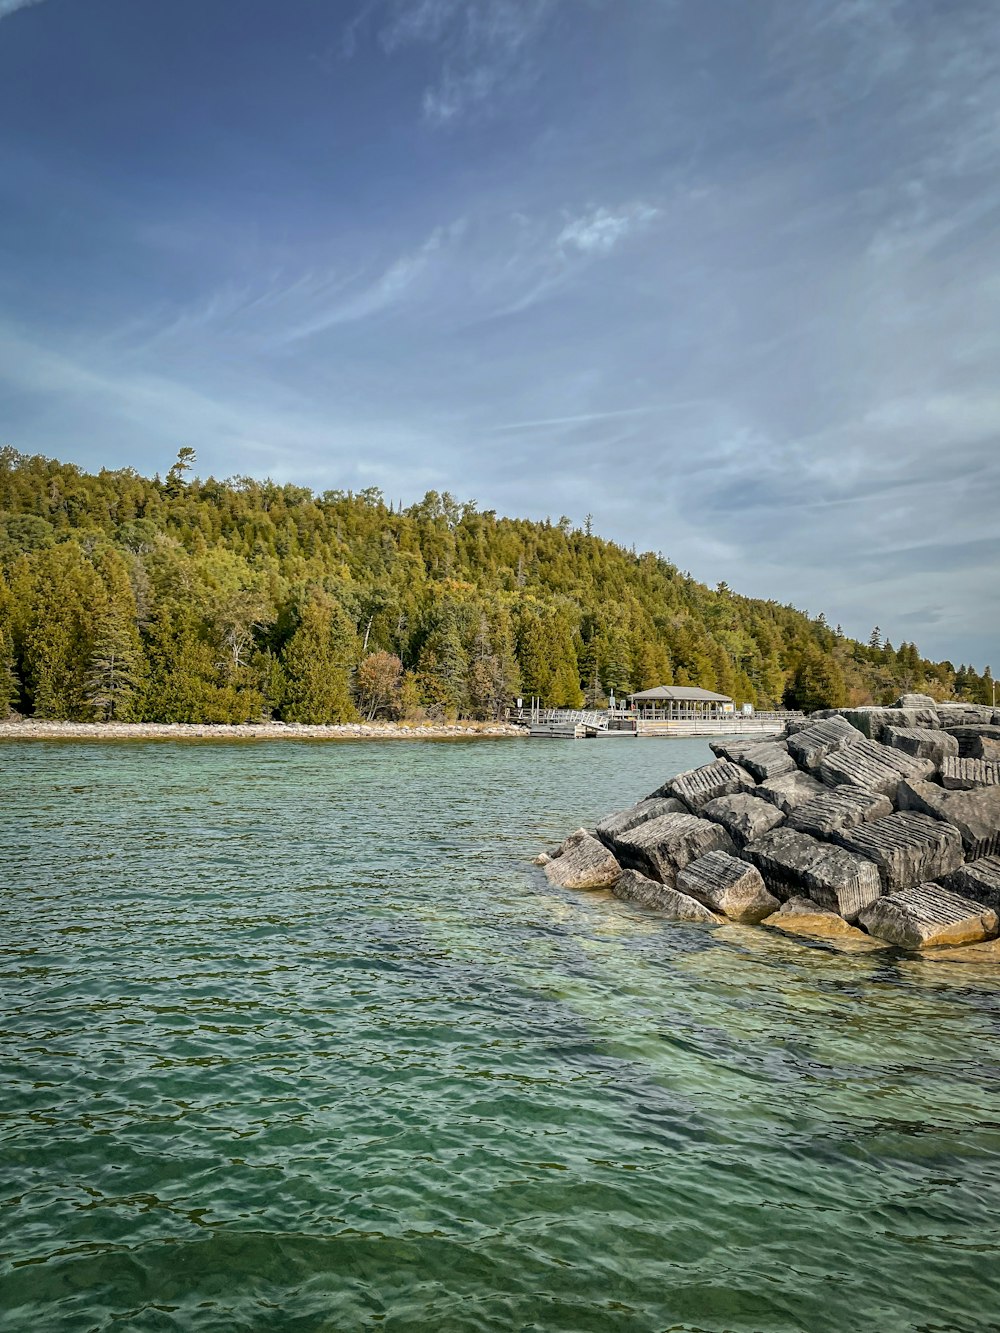 a body of water with rocks and trees in the background